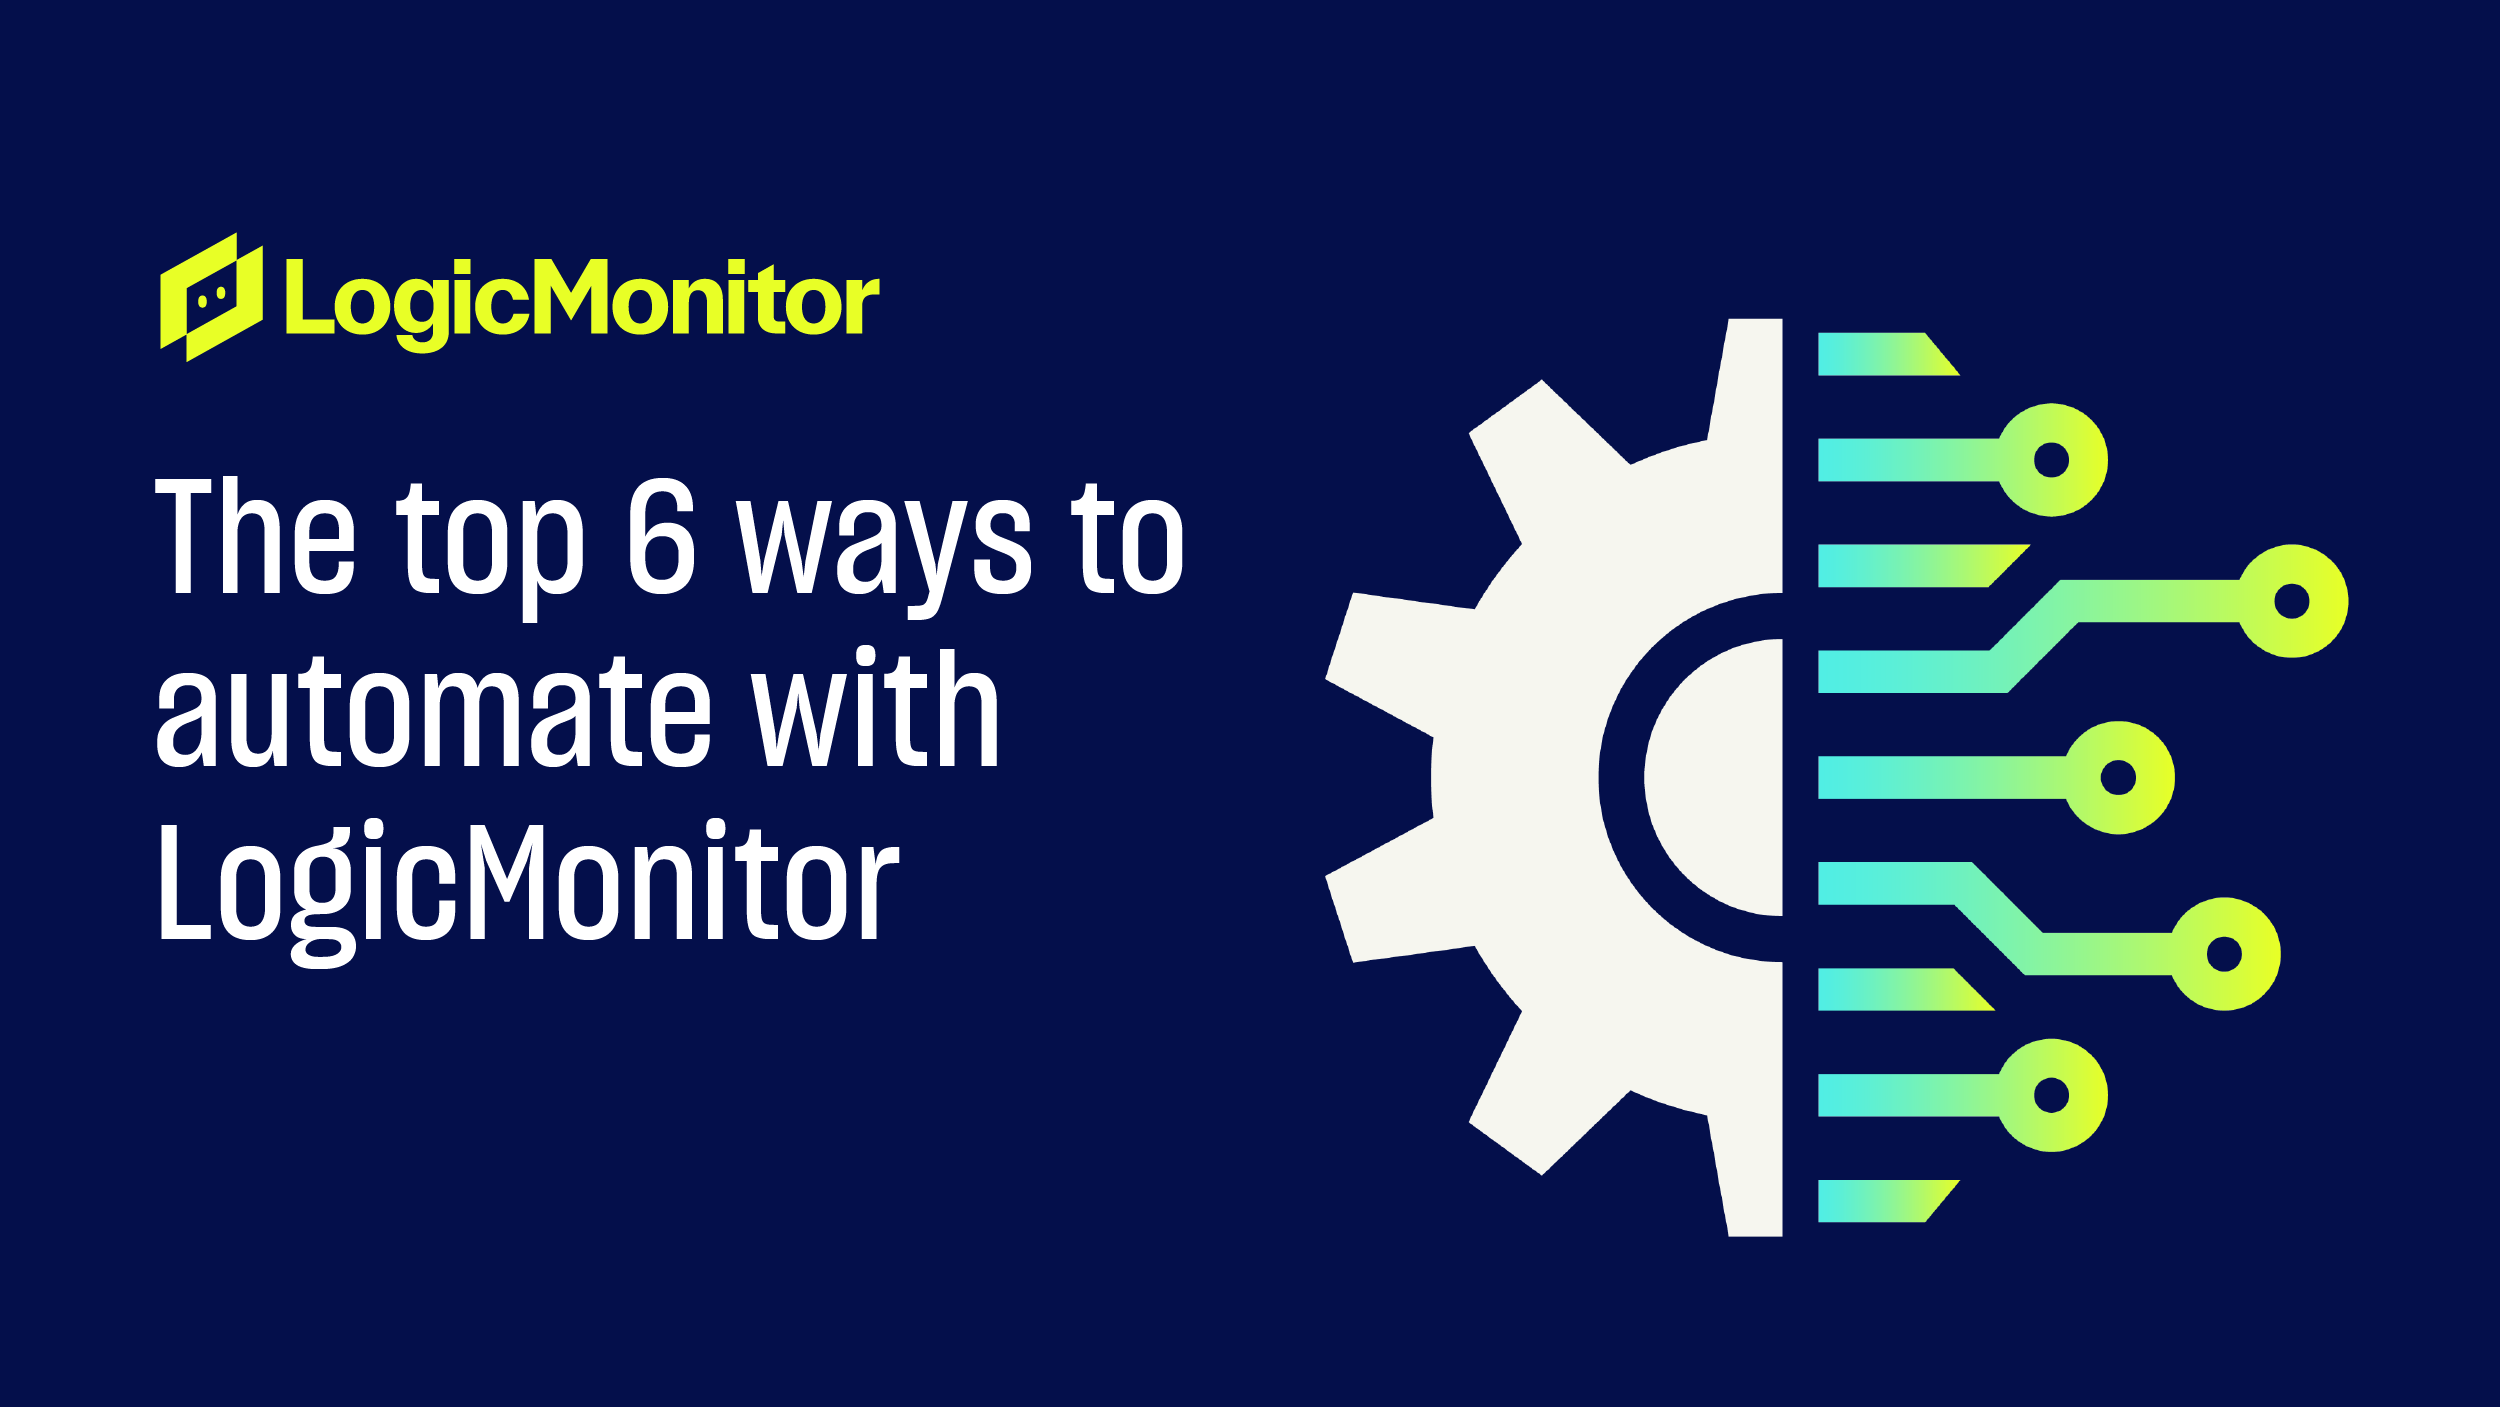 6 ways to automate with LogicMonitor